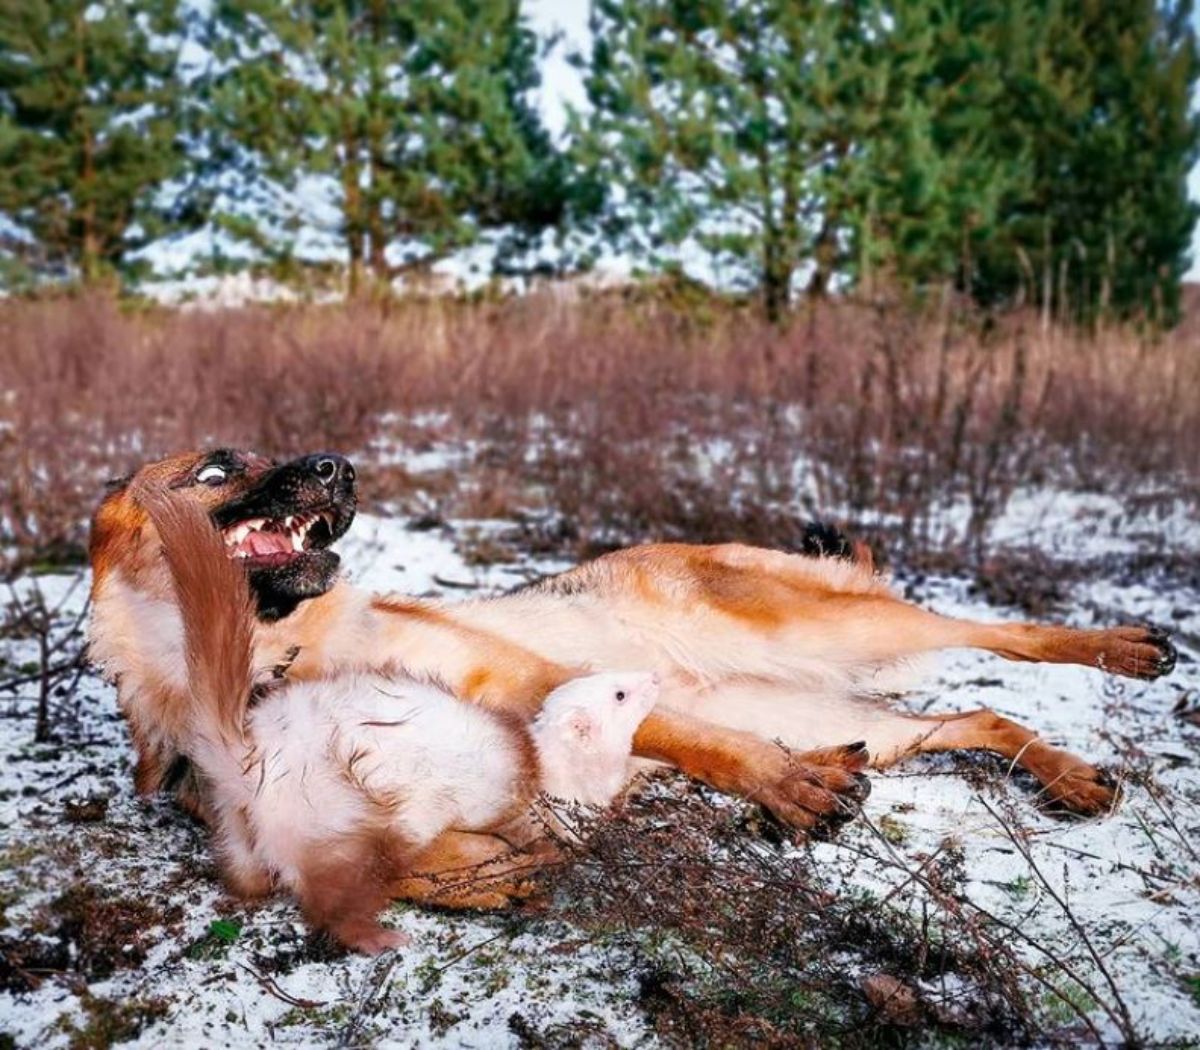 german shepherd laying on ground playing with a brown and white ferret